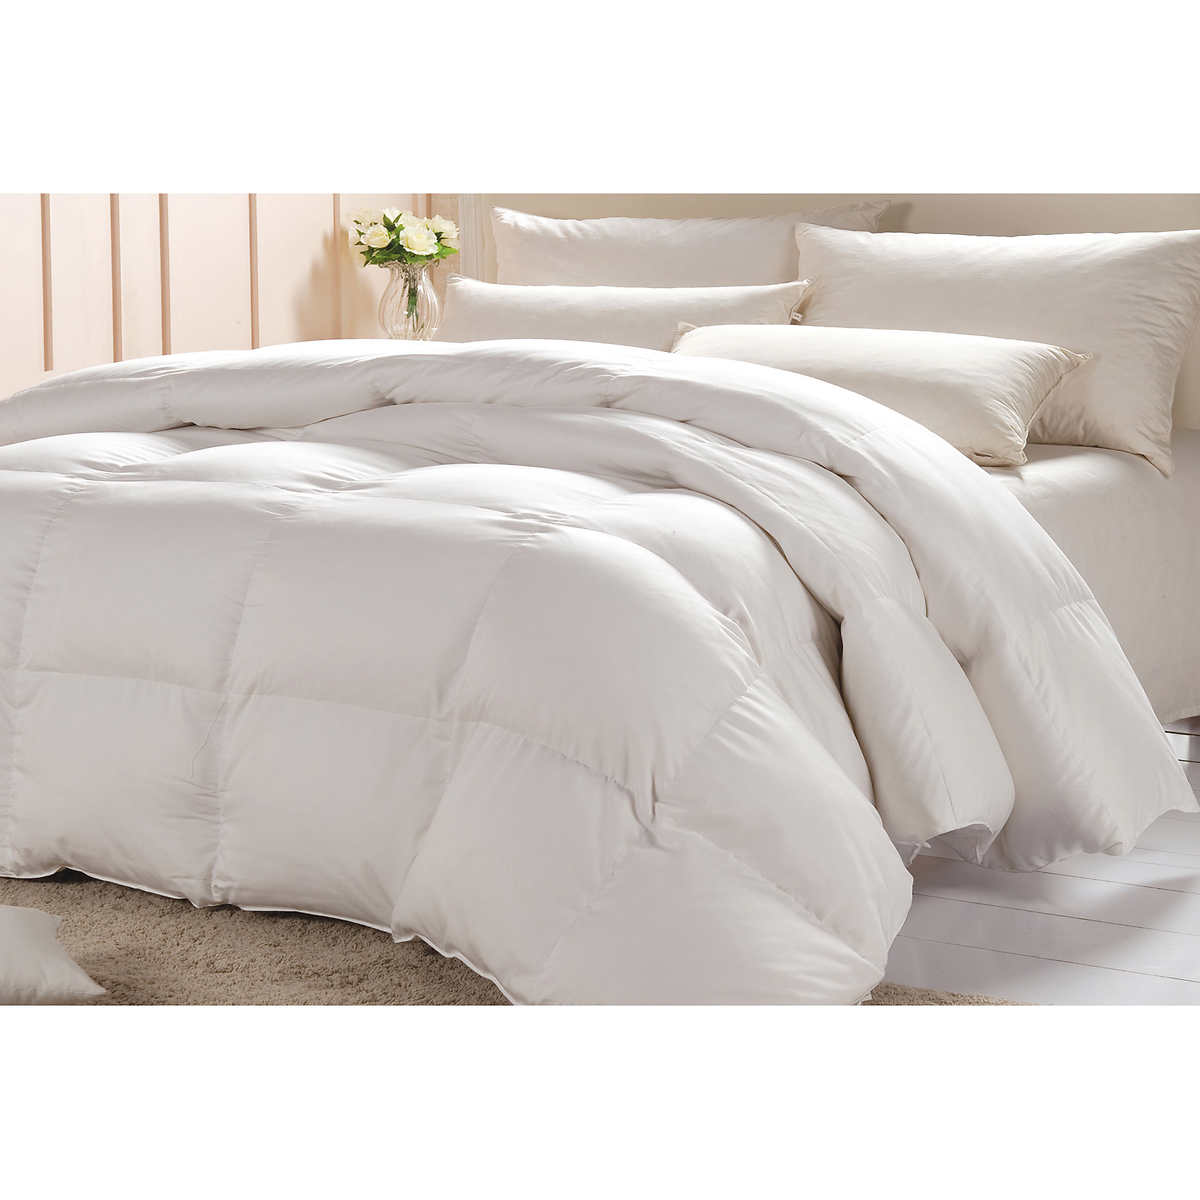 North Home Hungarian White Goose Down Duvet